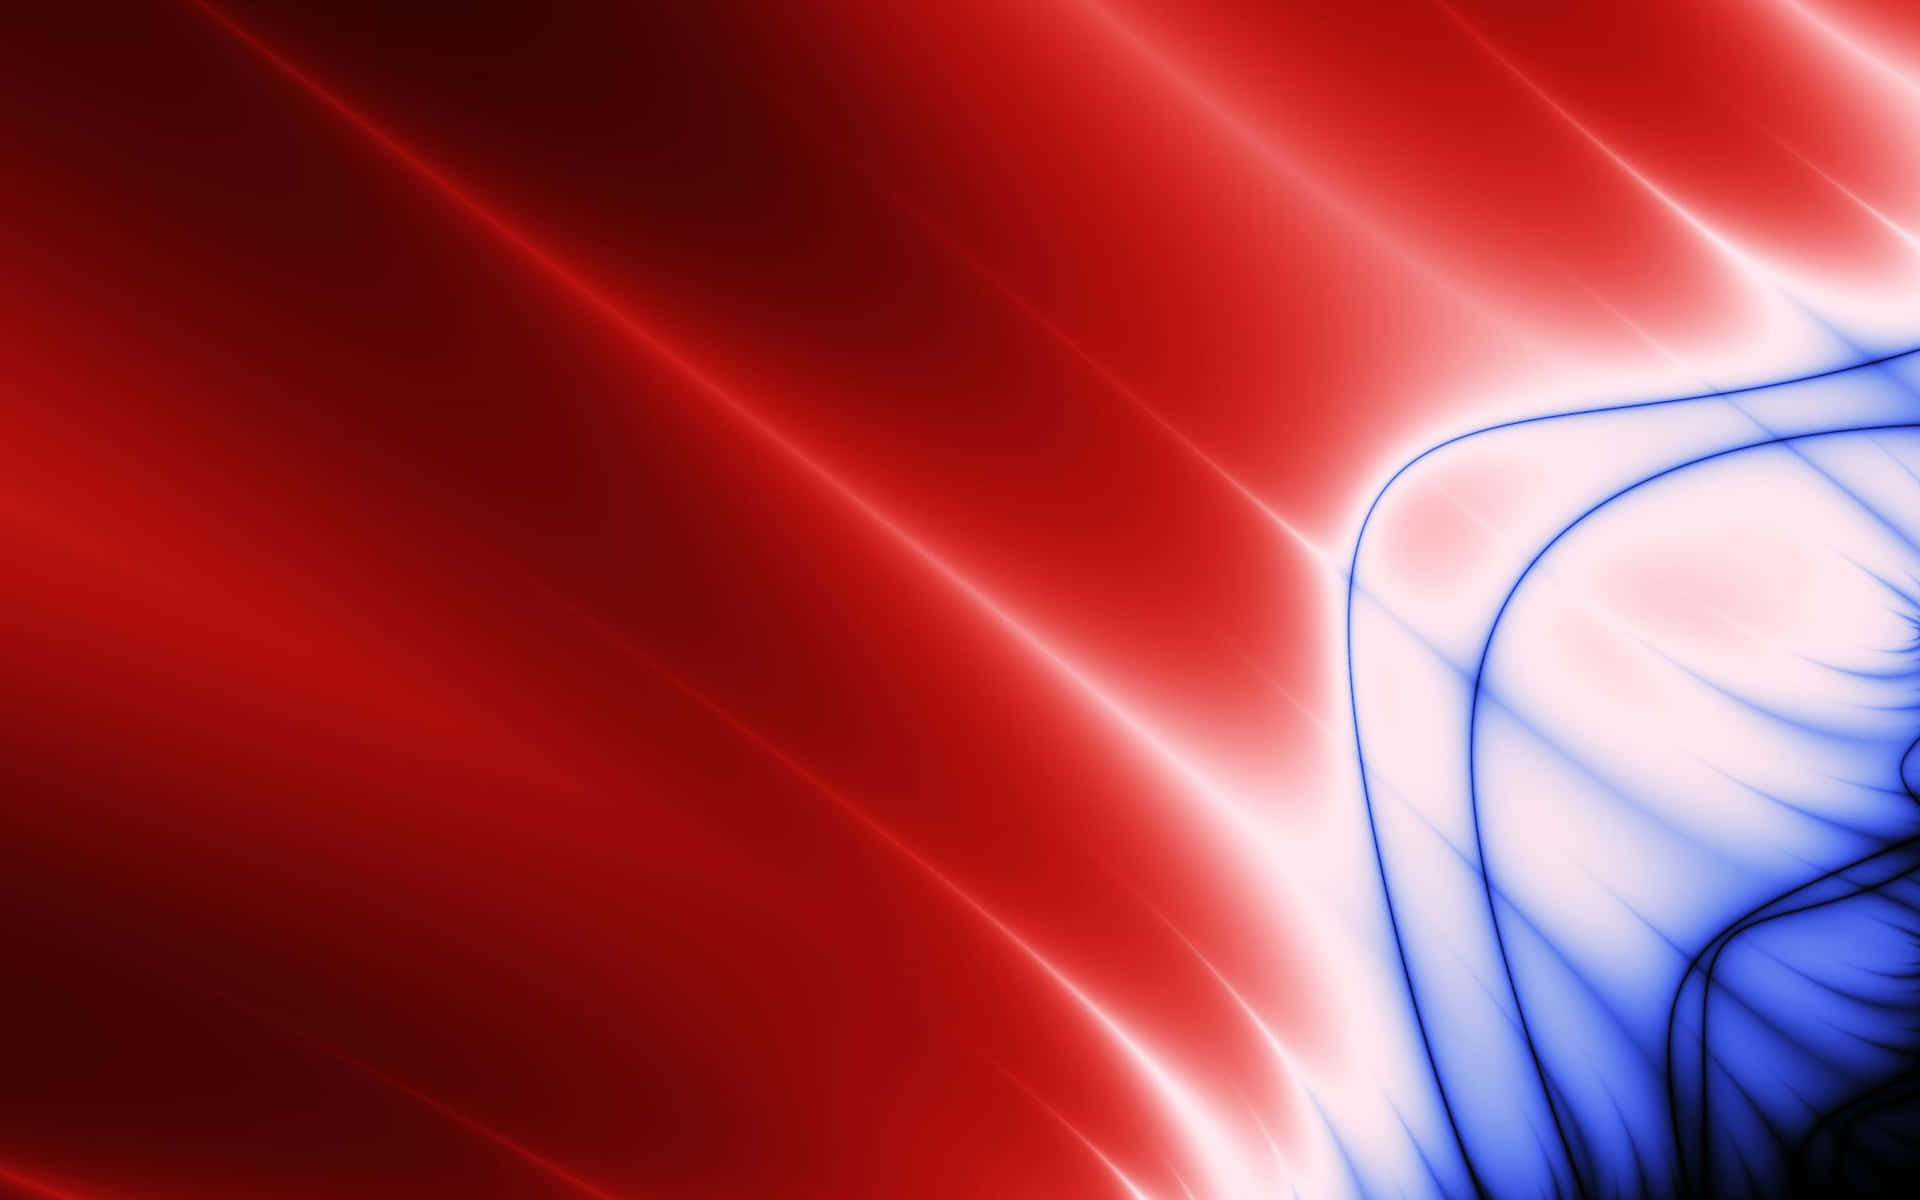 Abstract Curved Lines Blue And Red Background